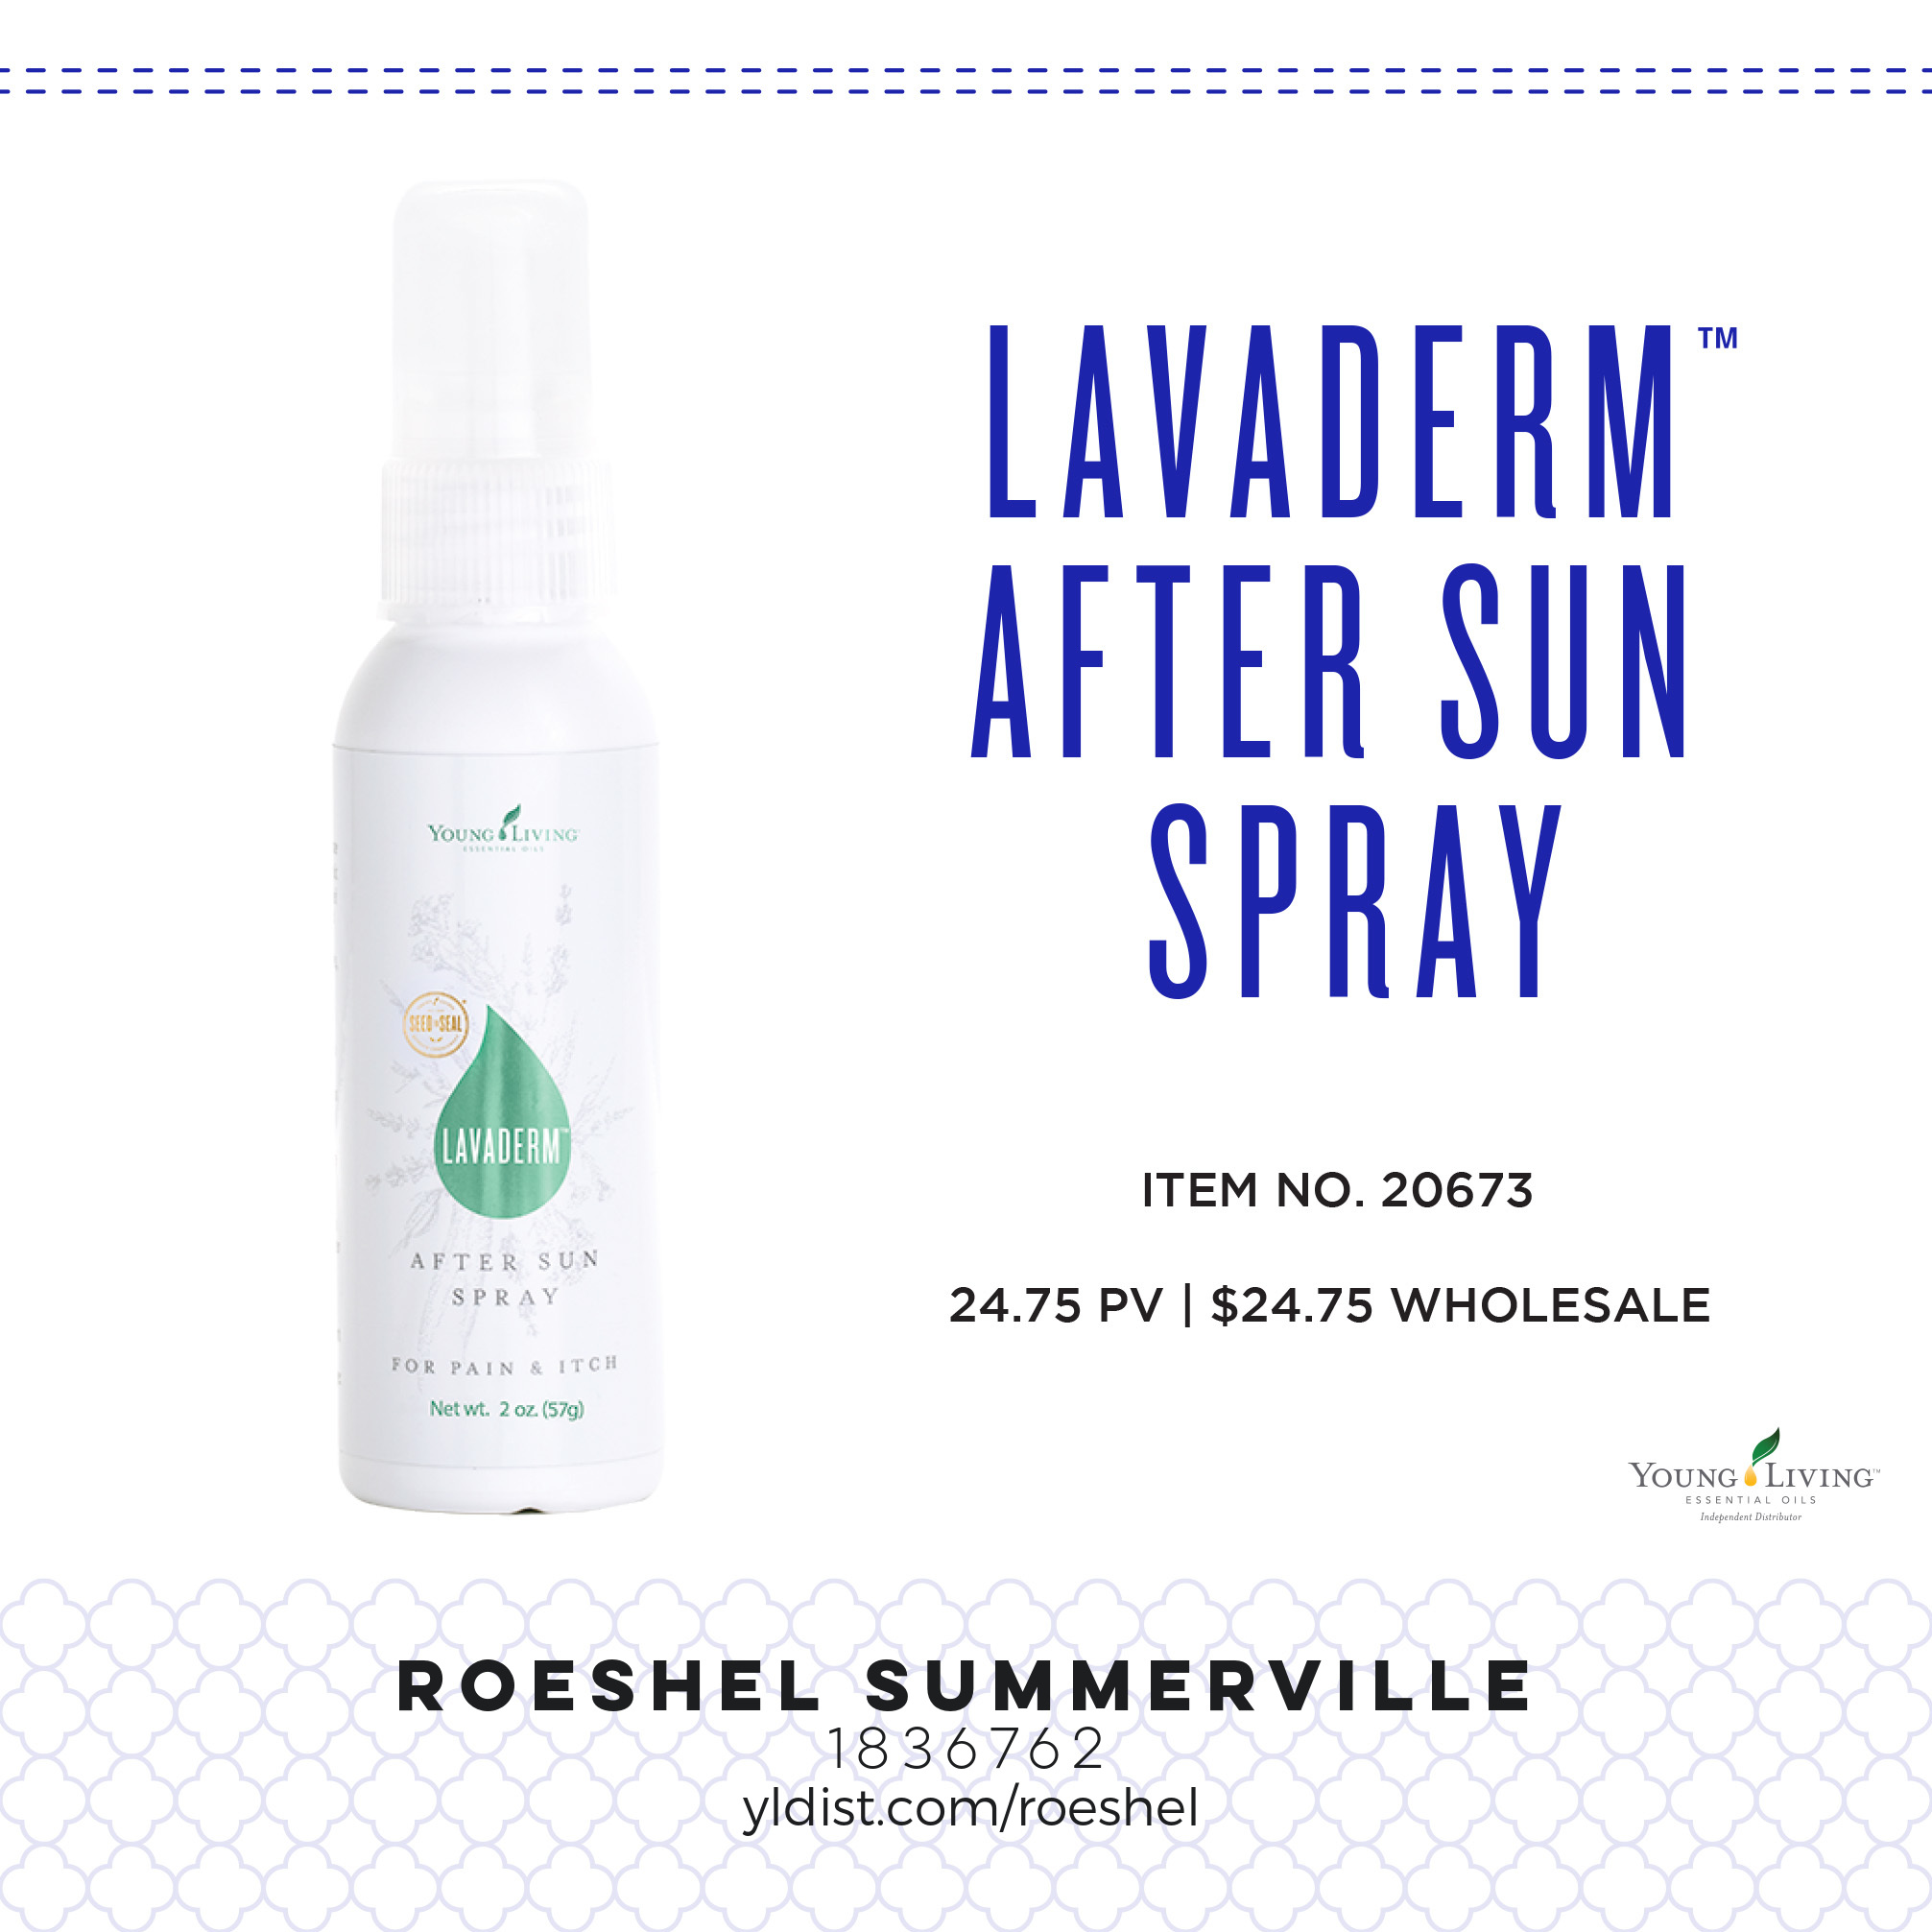 Promote healthy skin with LavaDerm™, Young Living’s refreshing Lavender spray. It’s made with skin-loving ingredients such as aloe, Lavender, Northern Lights Black Spruce, and Helichrysum to gently support healthy-looking skin. Its mild and gentle formula lightly moisturizes while also soothing and rejuvenating skin. Incorporate its refreshing feel and calming aroma into your nighttime routine or use it as needed throughout the day. The compact and convenient design of this skin moisturizer spray makes it easy to store wherever you need it, whether in your purse, travel bag, bedside table, or office desk.